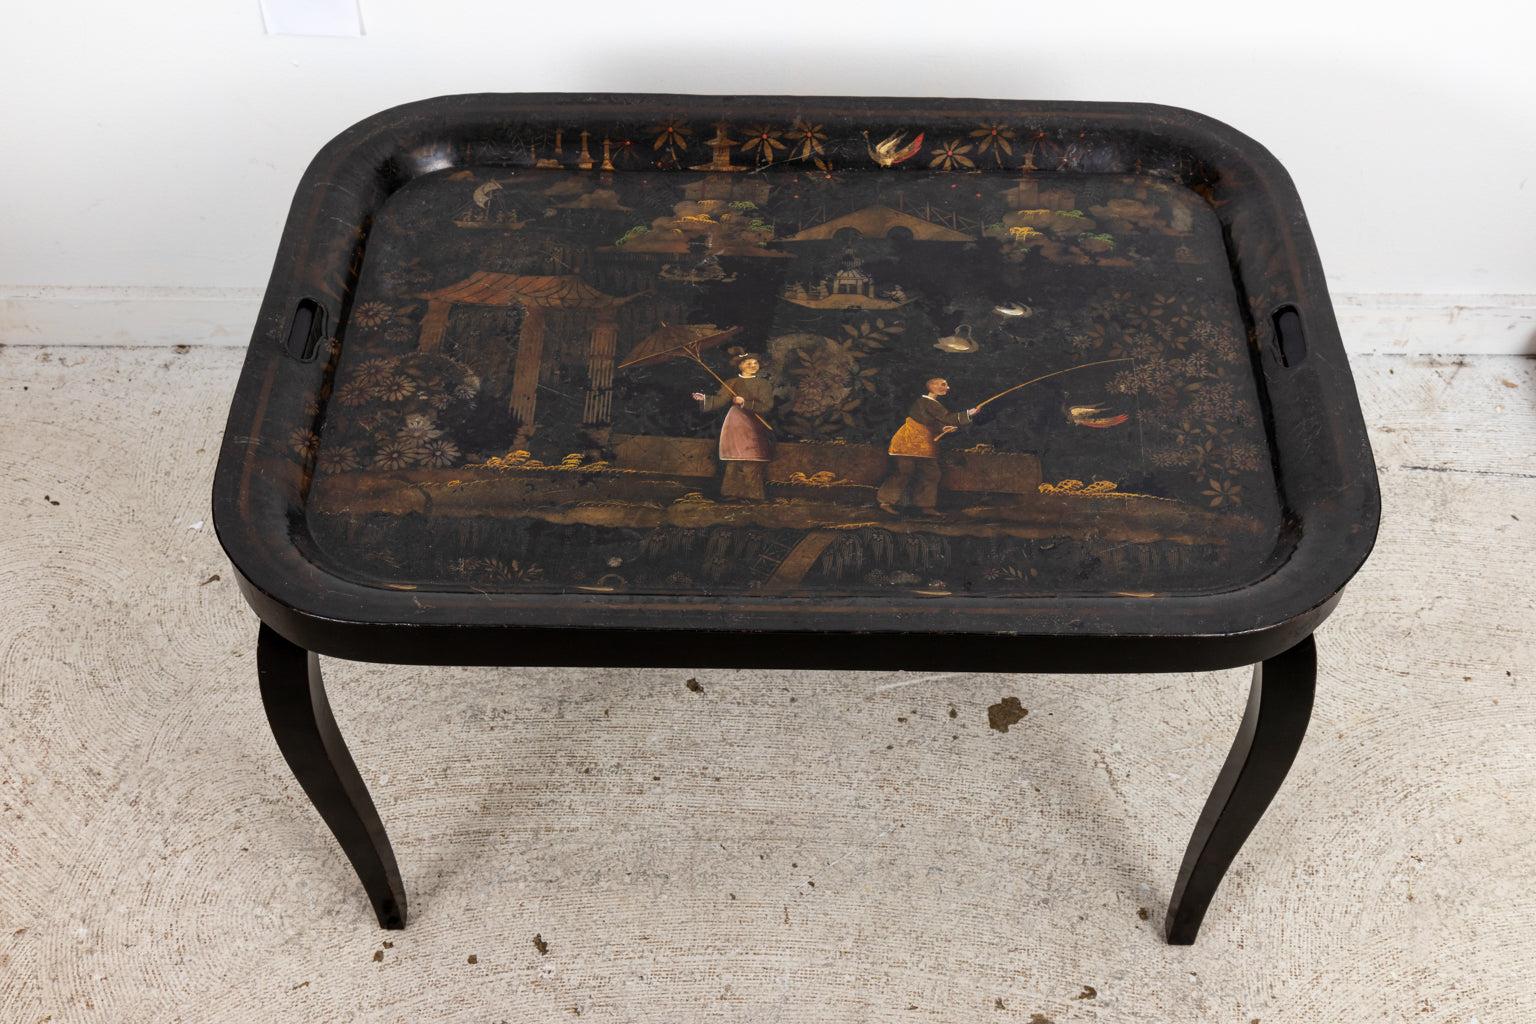 Circa 1920s black tole Chinoiserie style tray table with a custom base and a painted village scene on the tabletop. Origin unknown. Please note of wear consistent with age including minor chips, paint loss, patina, and finish loss.